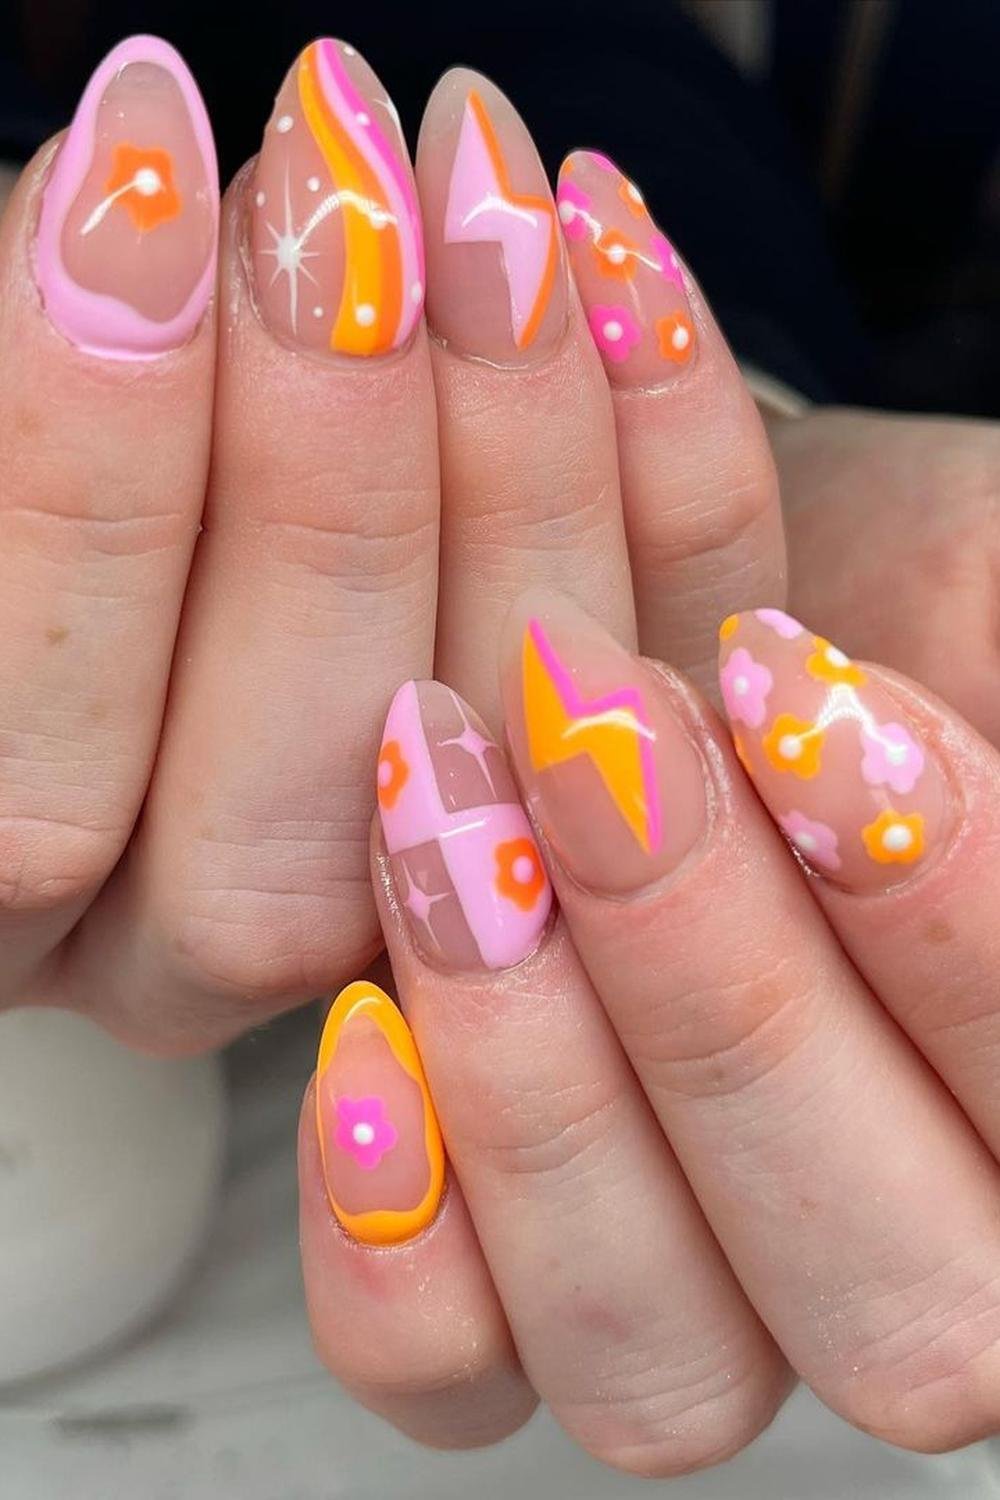 21 - Picture of Pink and Orange Nails